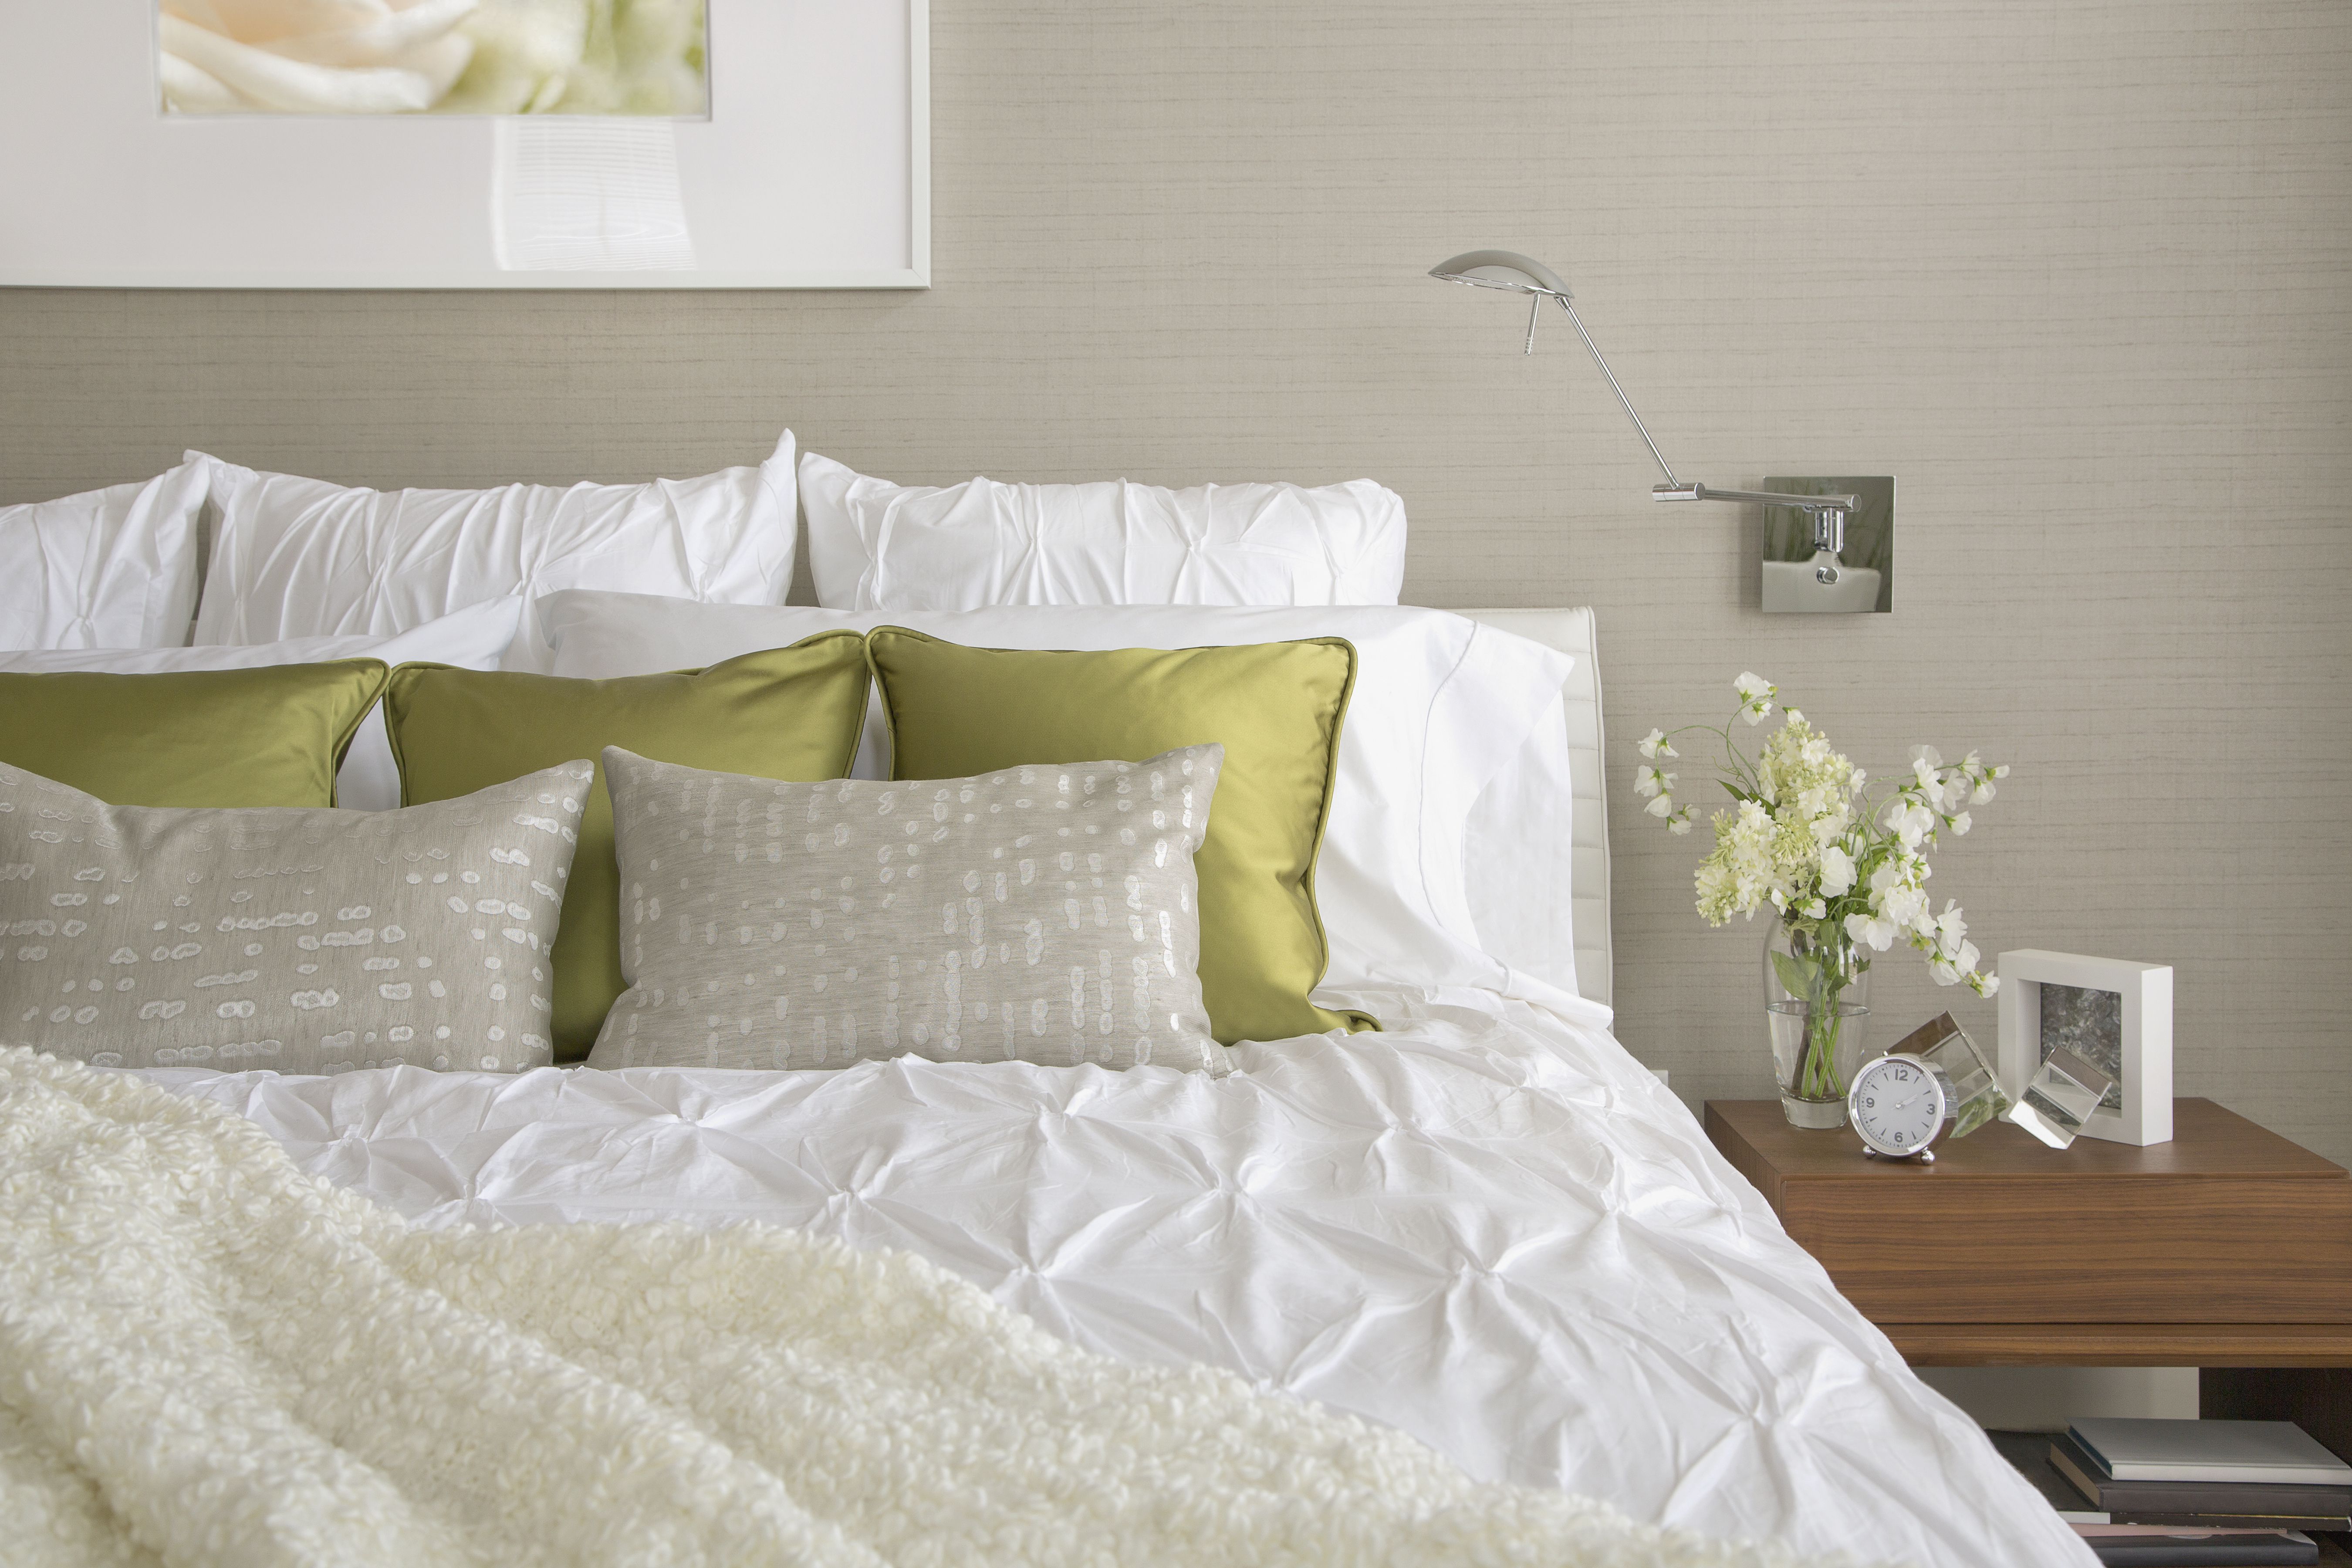 Contemporary Bedroom With Textured Bedding And Throw Pillows 607041375 5915e7405f9b58647088037a 